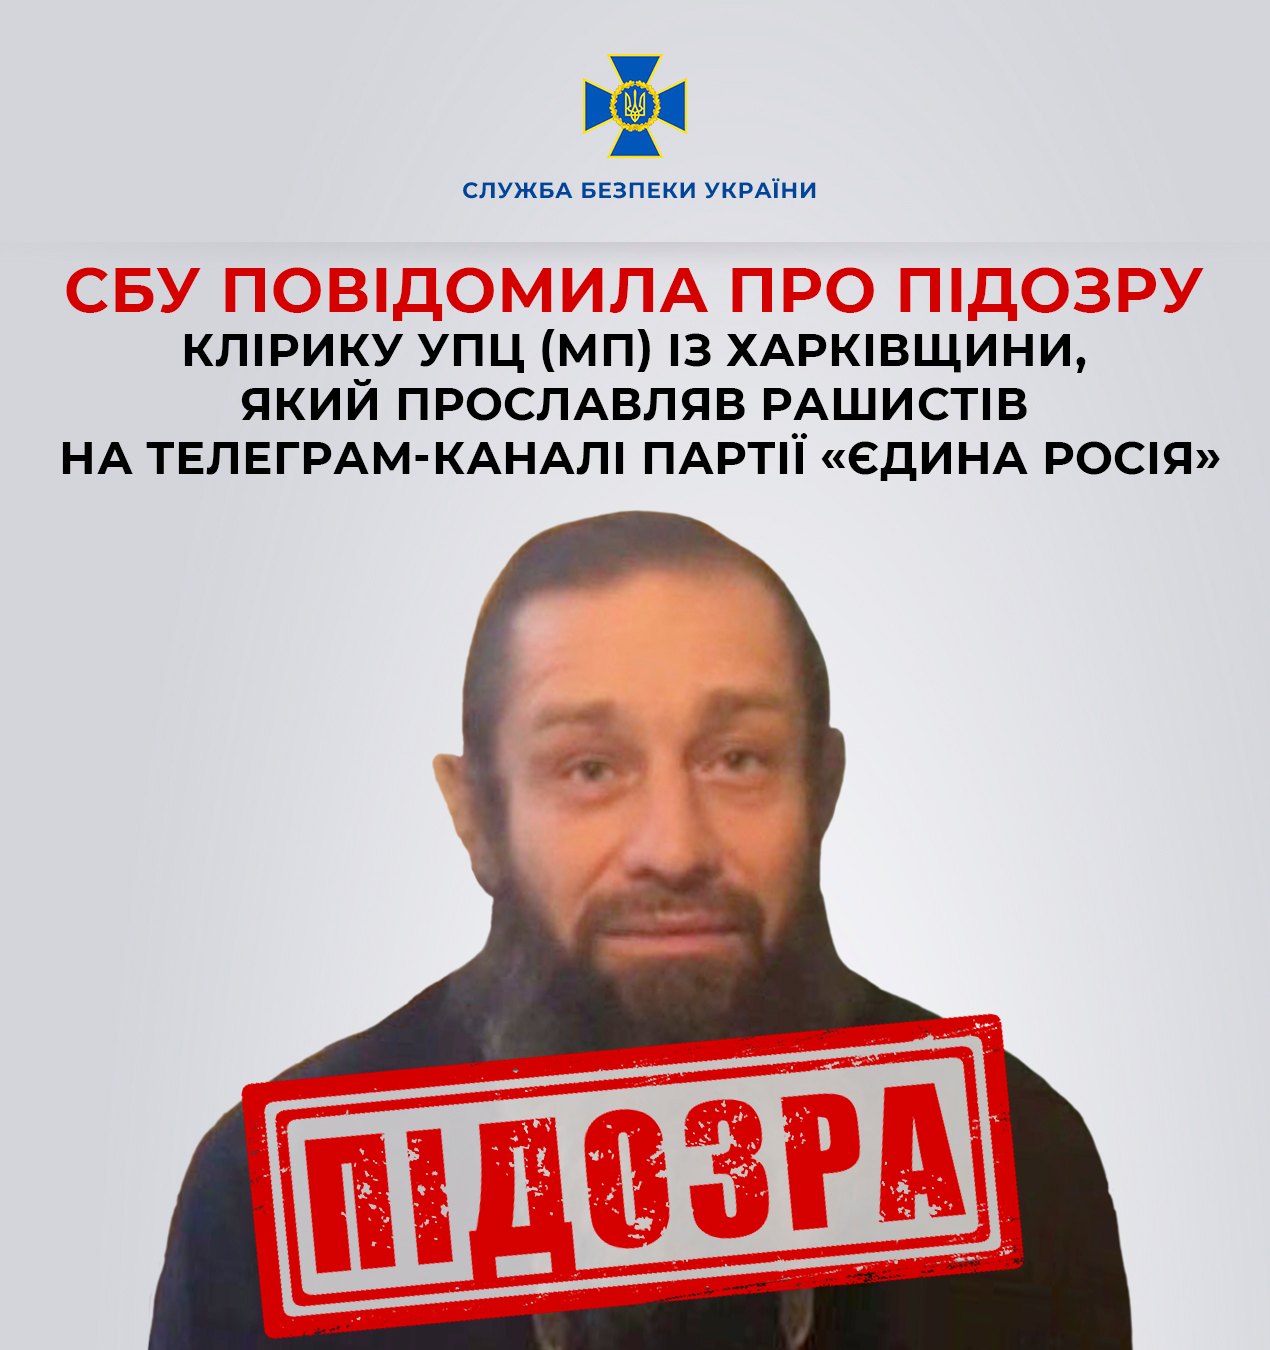 SBU exposes another rector of UOC (MP) Church in Kharkiv (Image courtesy: Facebook)